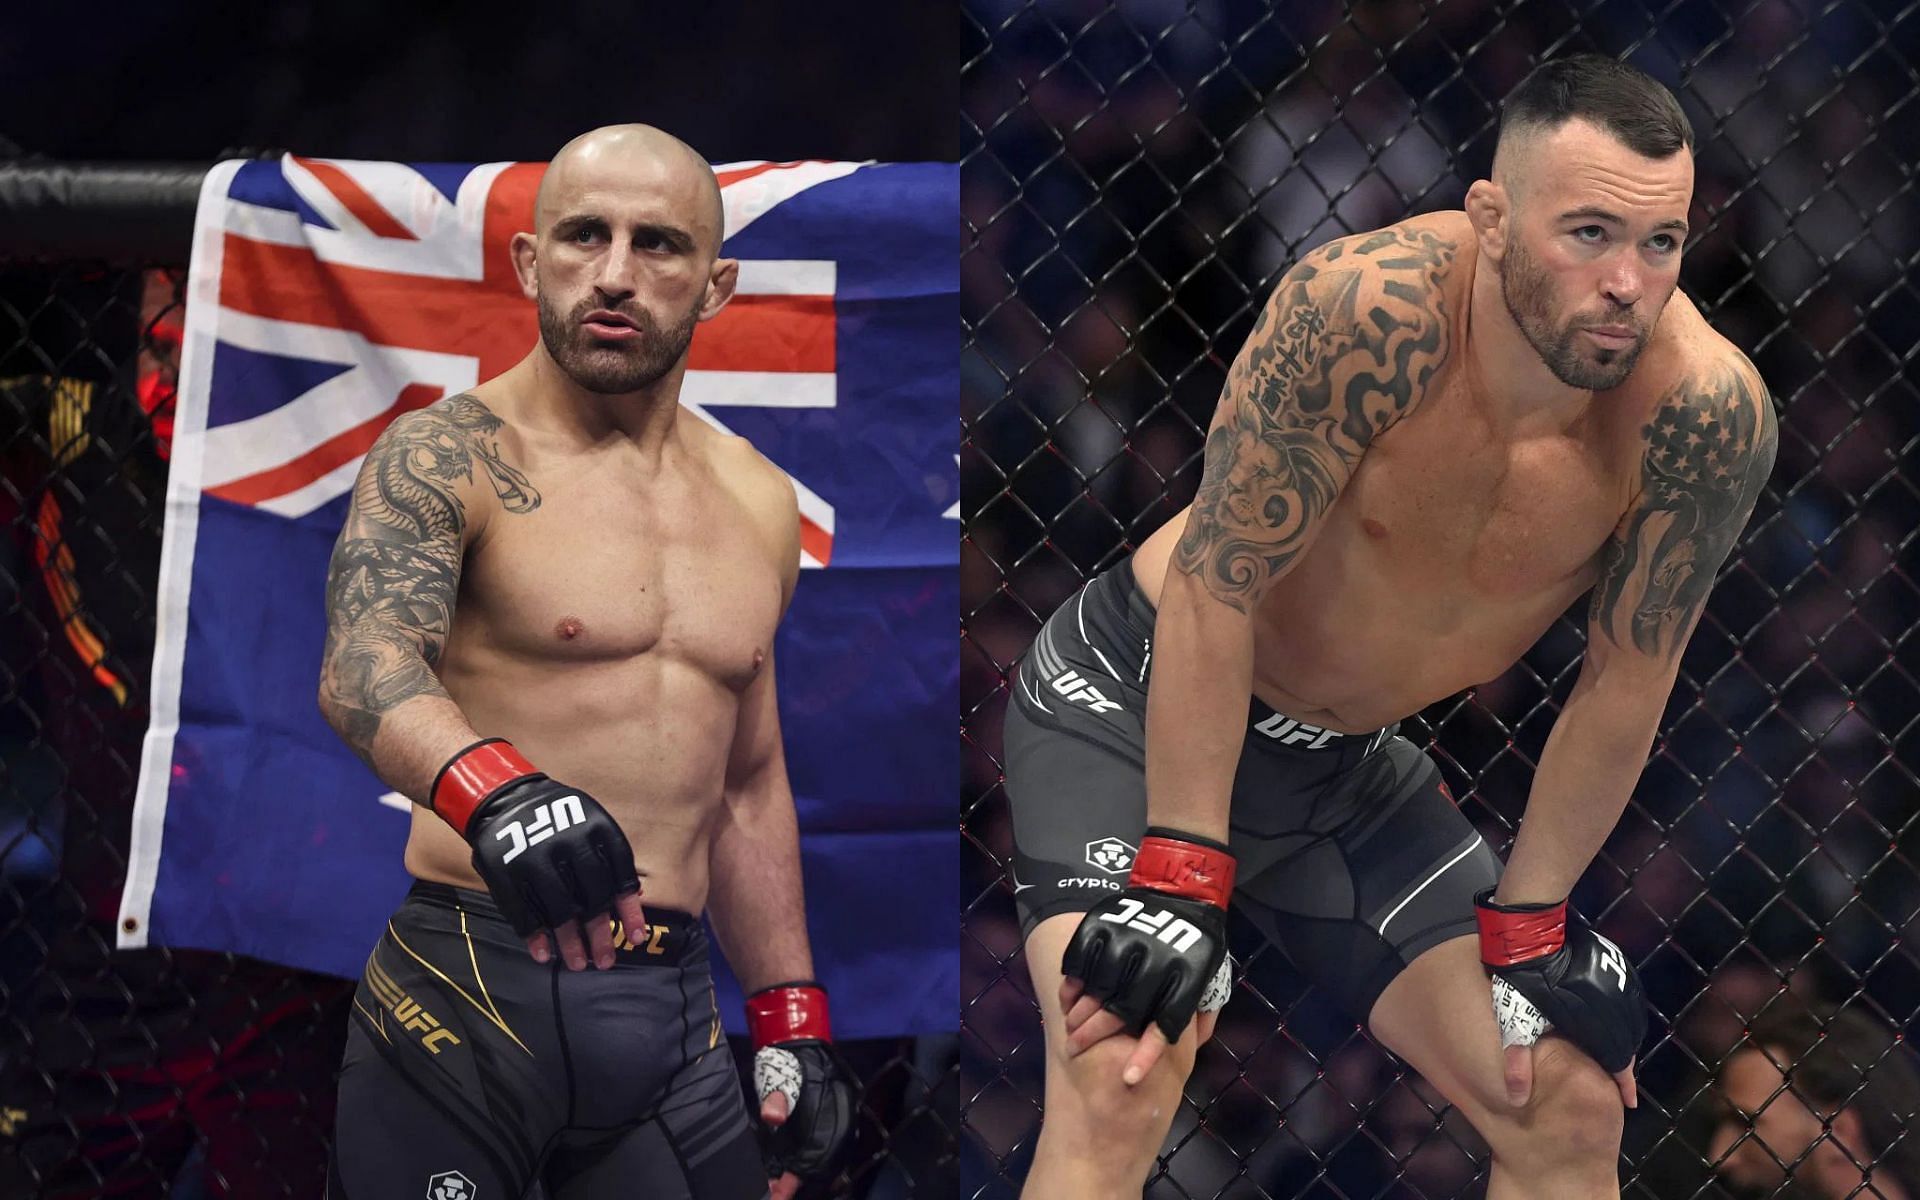 Alexander Volkanovski (left) does not mind moving up two weight classes to take on Colby Covington (right) [Images courtesy of Getty]